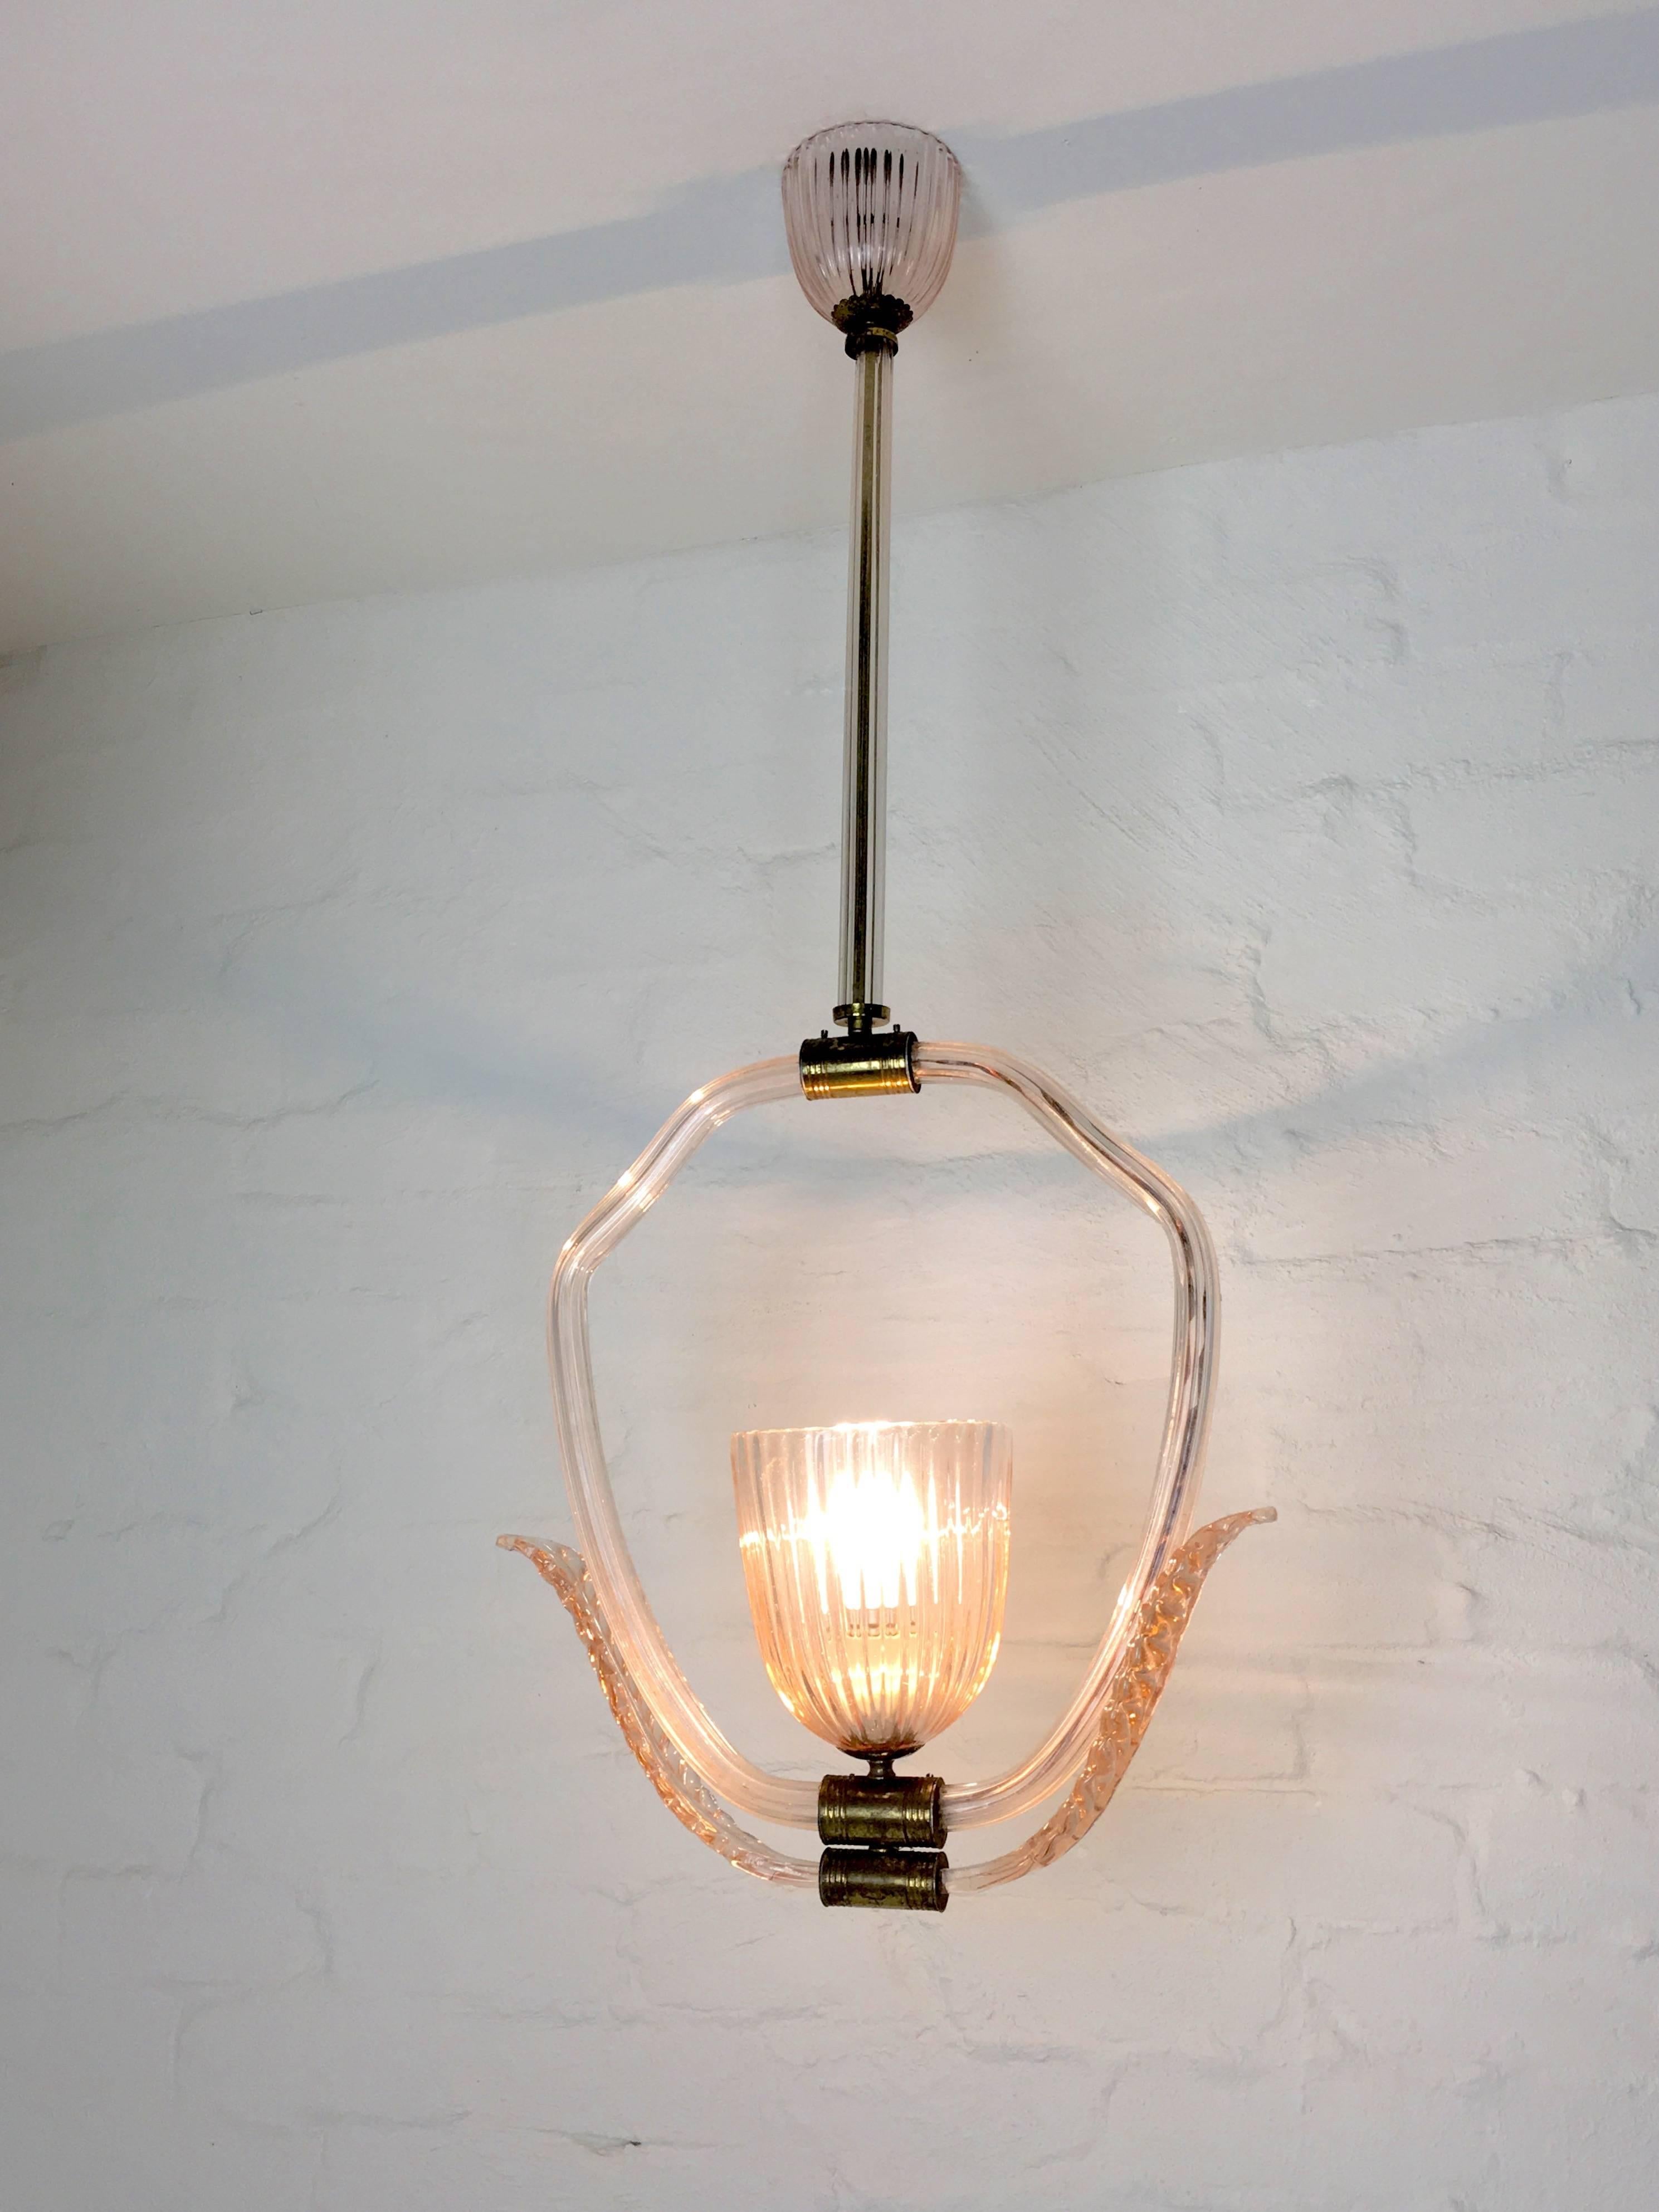 This lovely light came from the hallway of a late 1930s Melbourne bayside mansion. In Rose Pink Murano glass with brass fittings, it takes a single B22 (standard bayonet) bulb.

Beautiful oxide patina on the brass. Not as fragile as its delicate